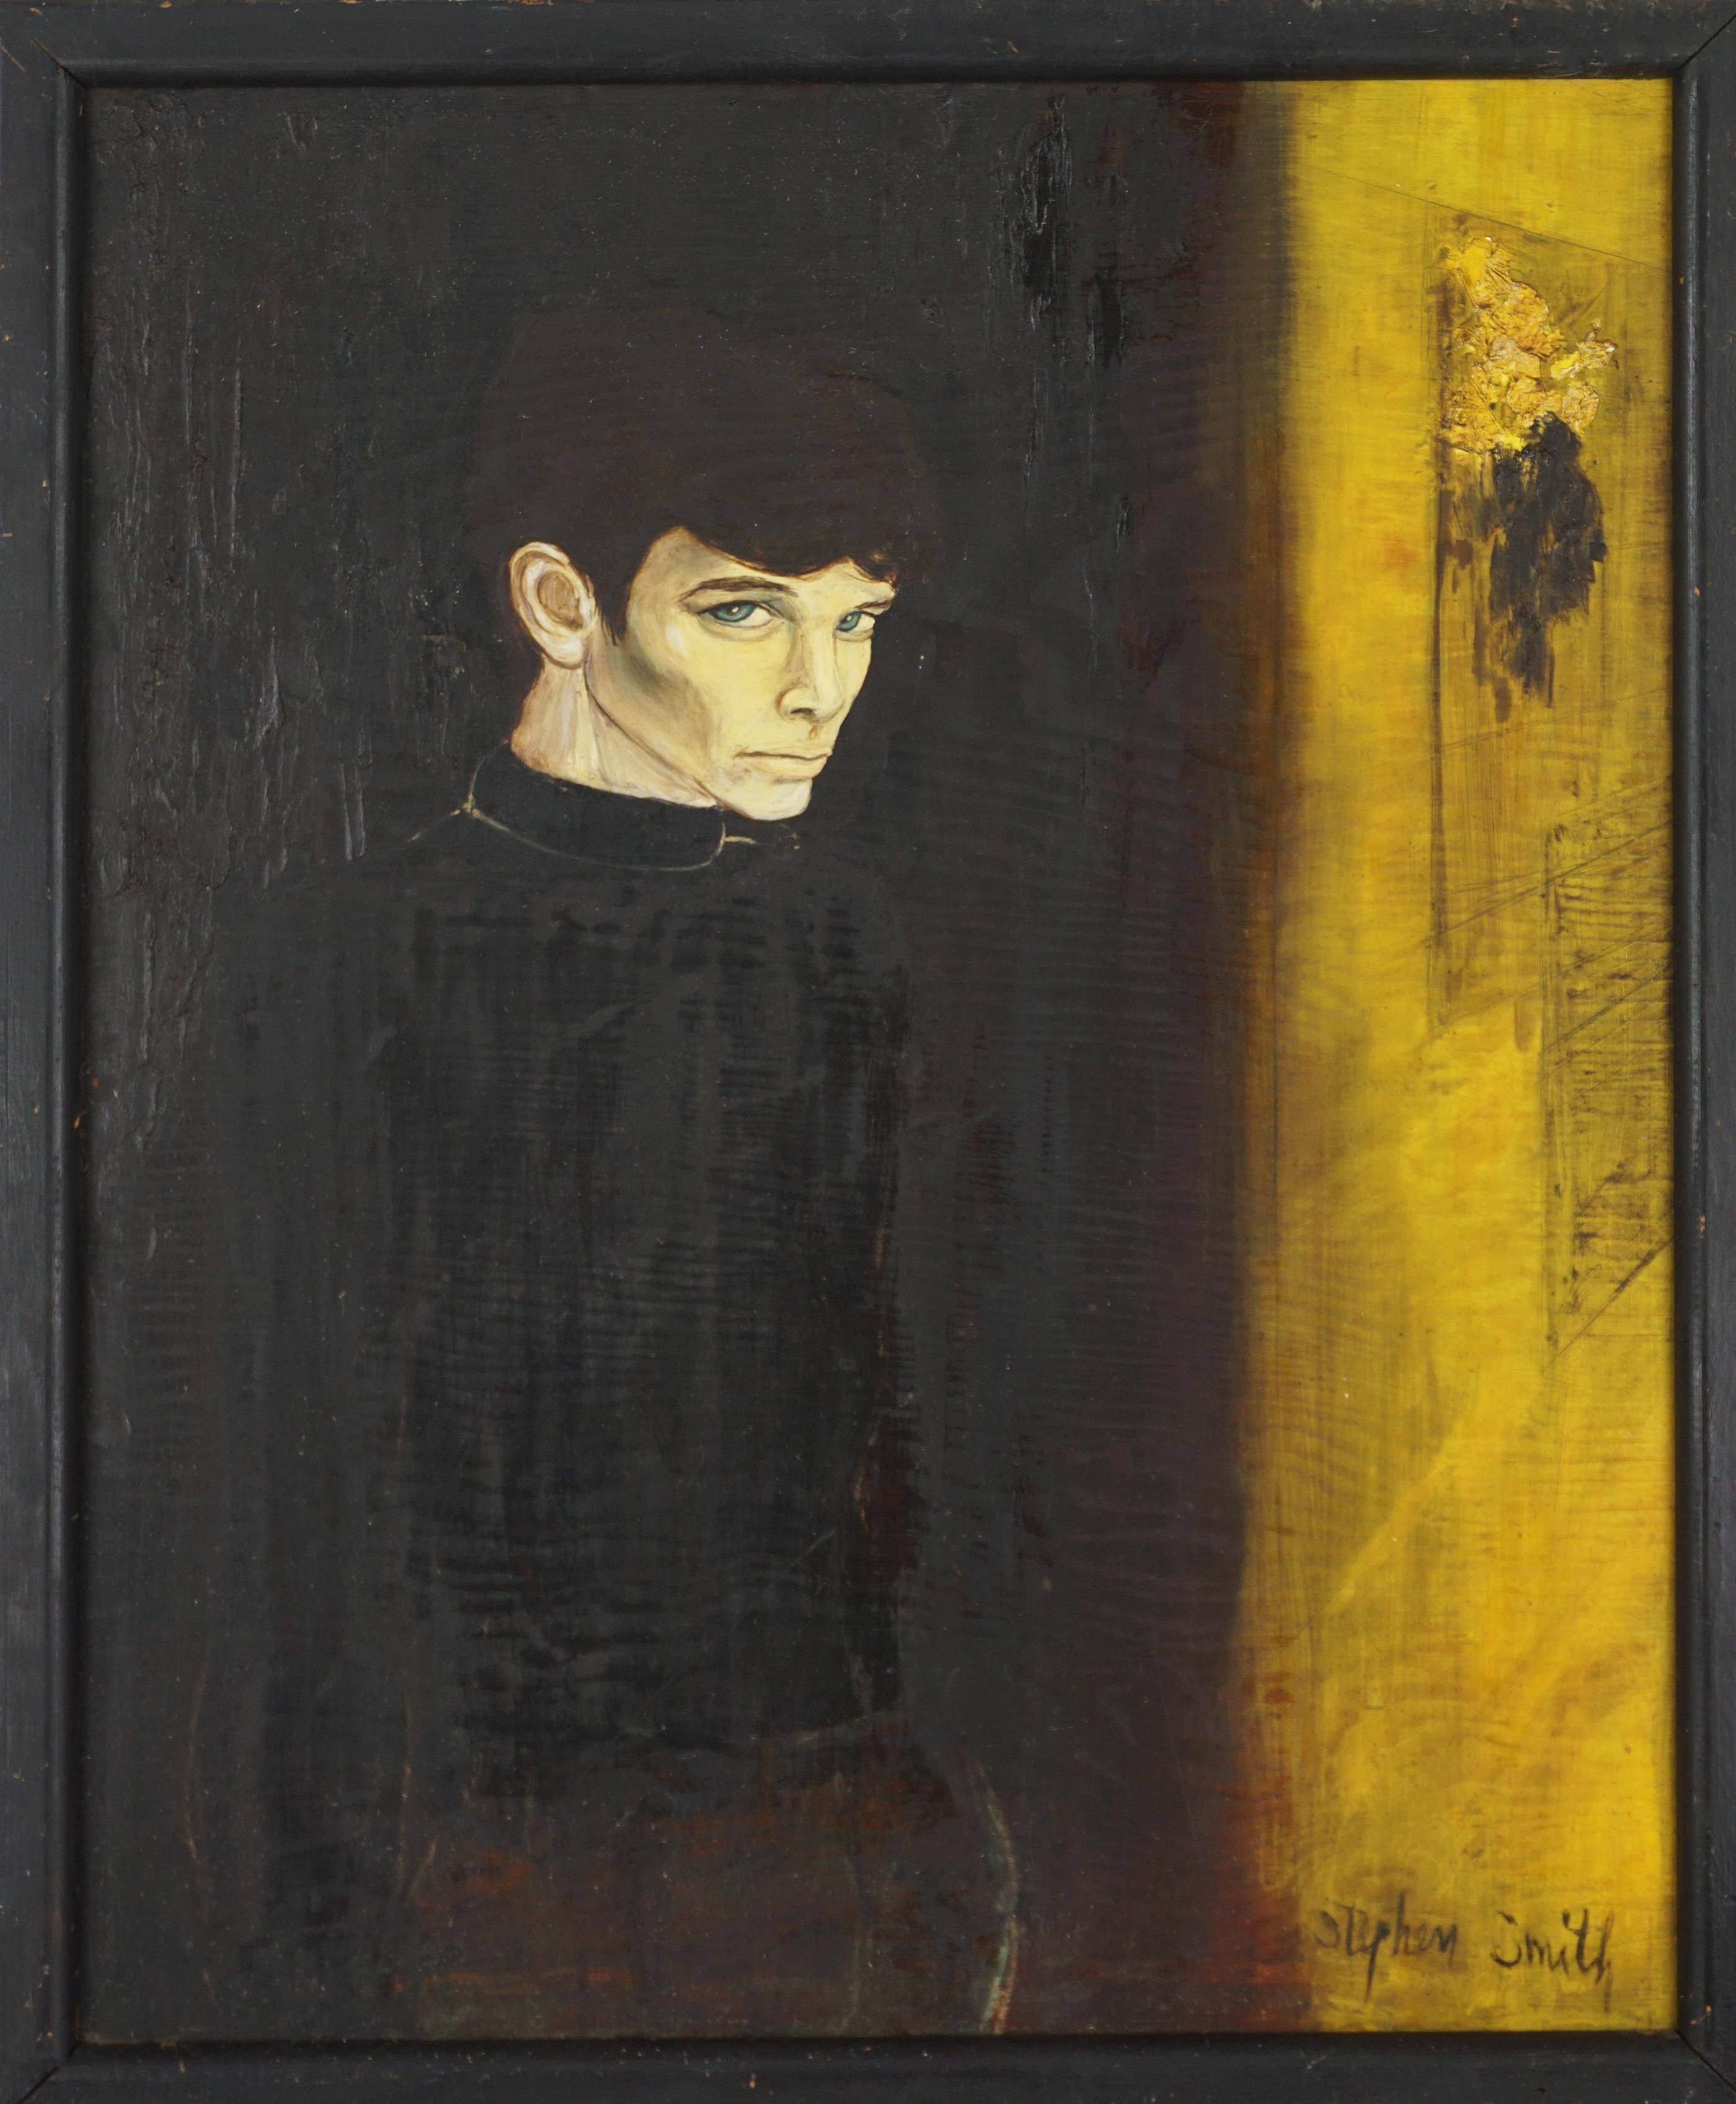 Stephen Smith Figurative Painting - Young Man Waiting In The Shadows Figurative